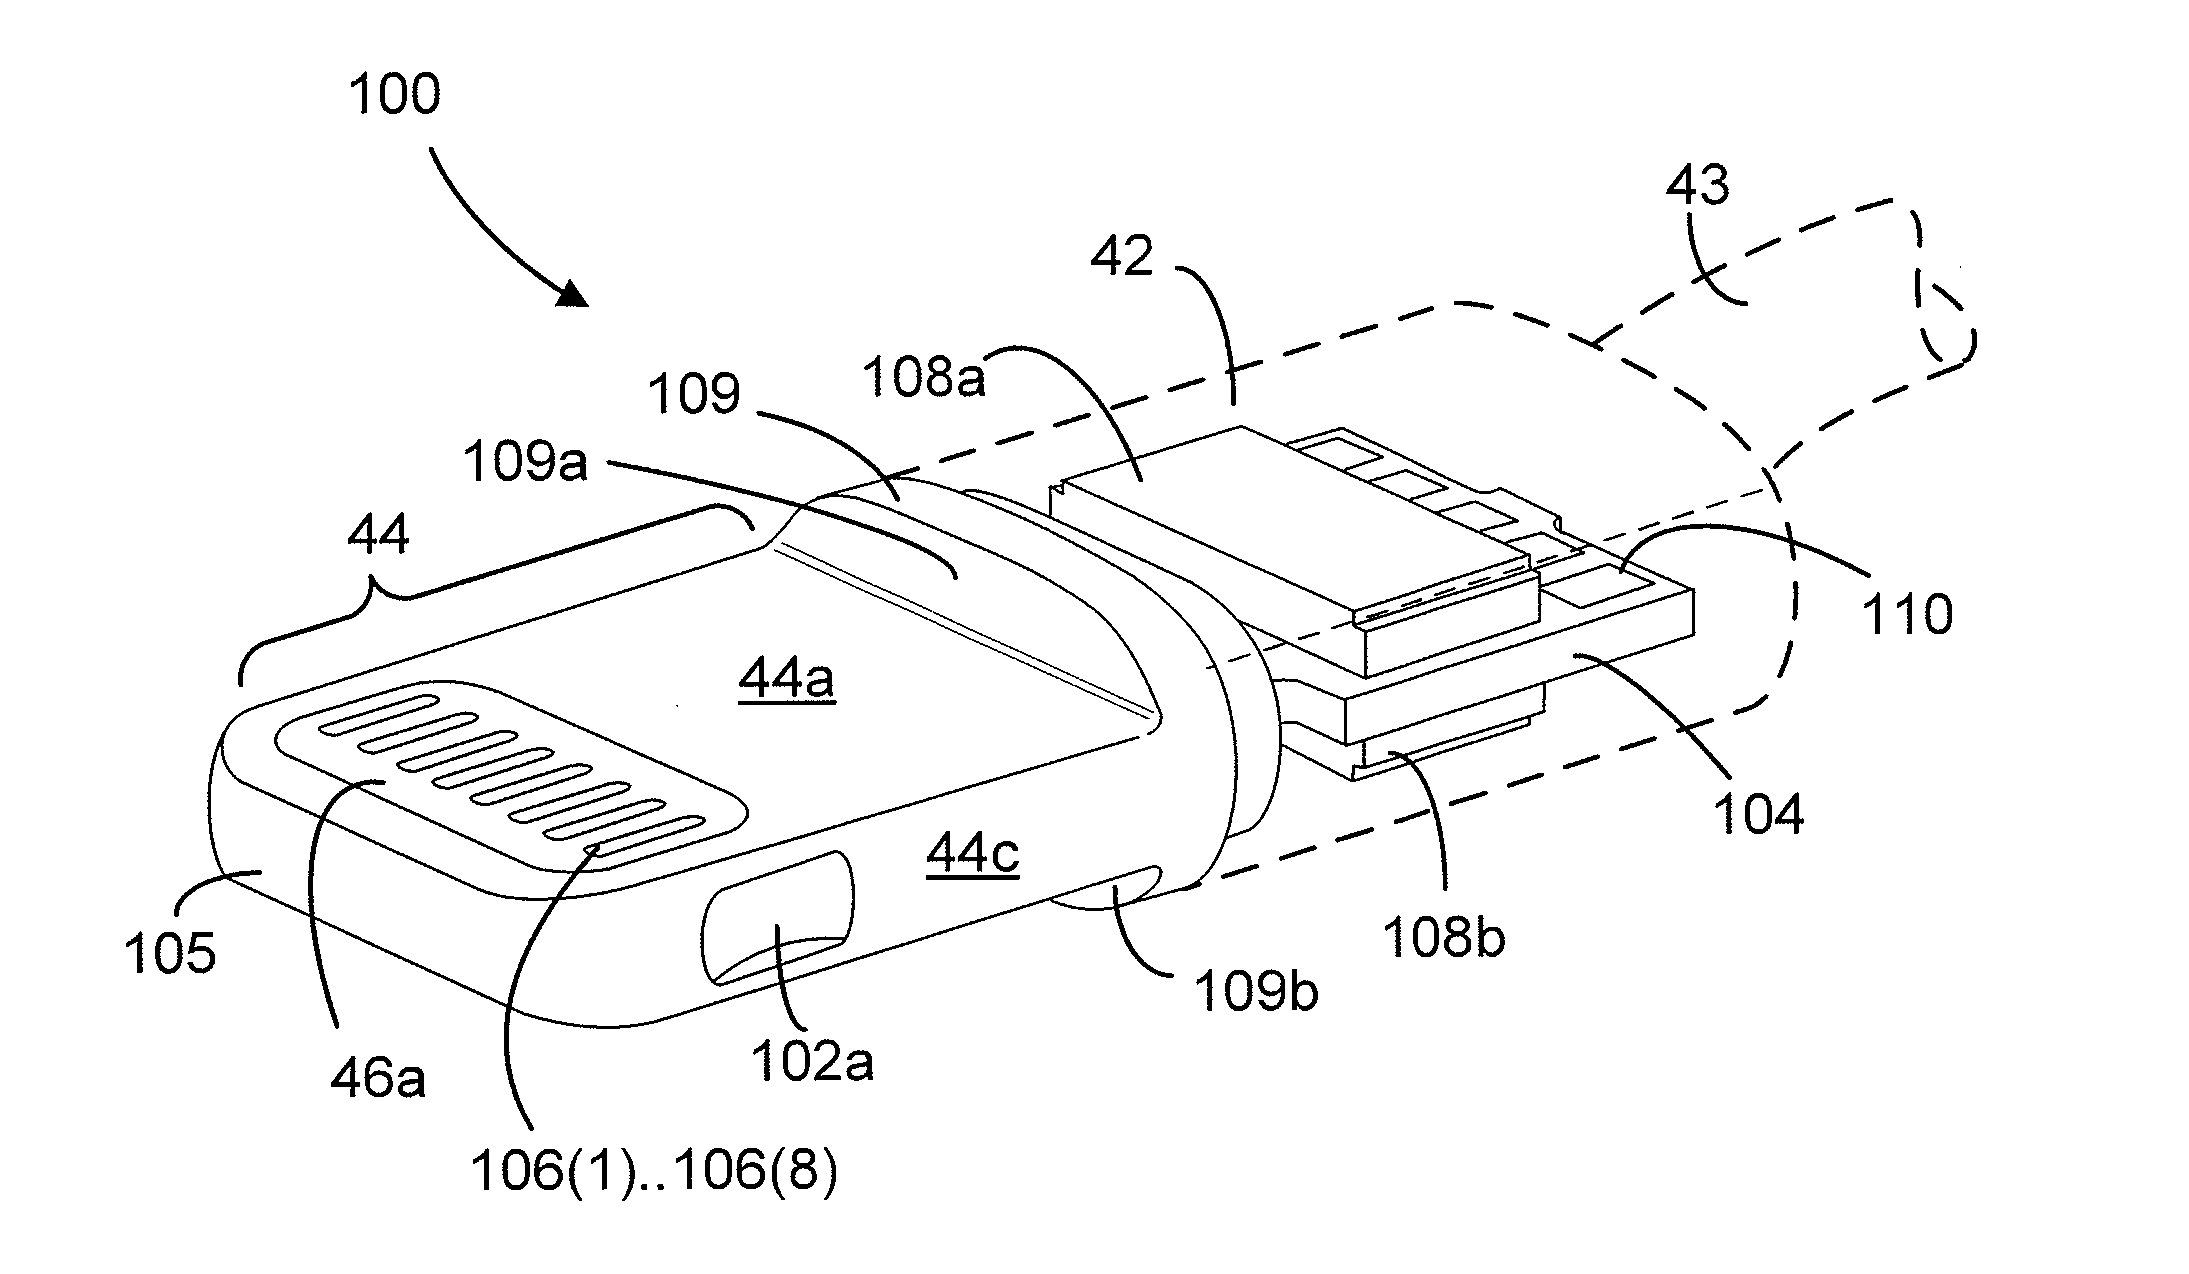 Dual orientation connector with external contacts and conductive frame